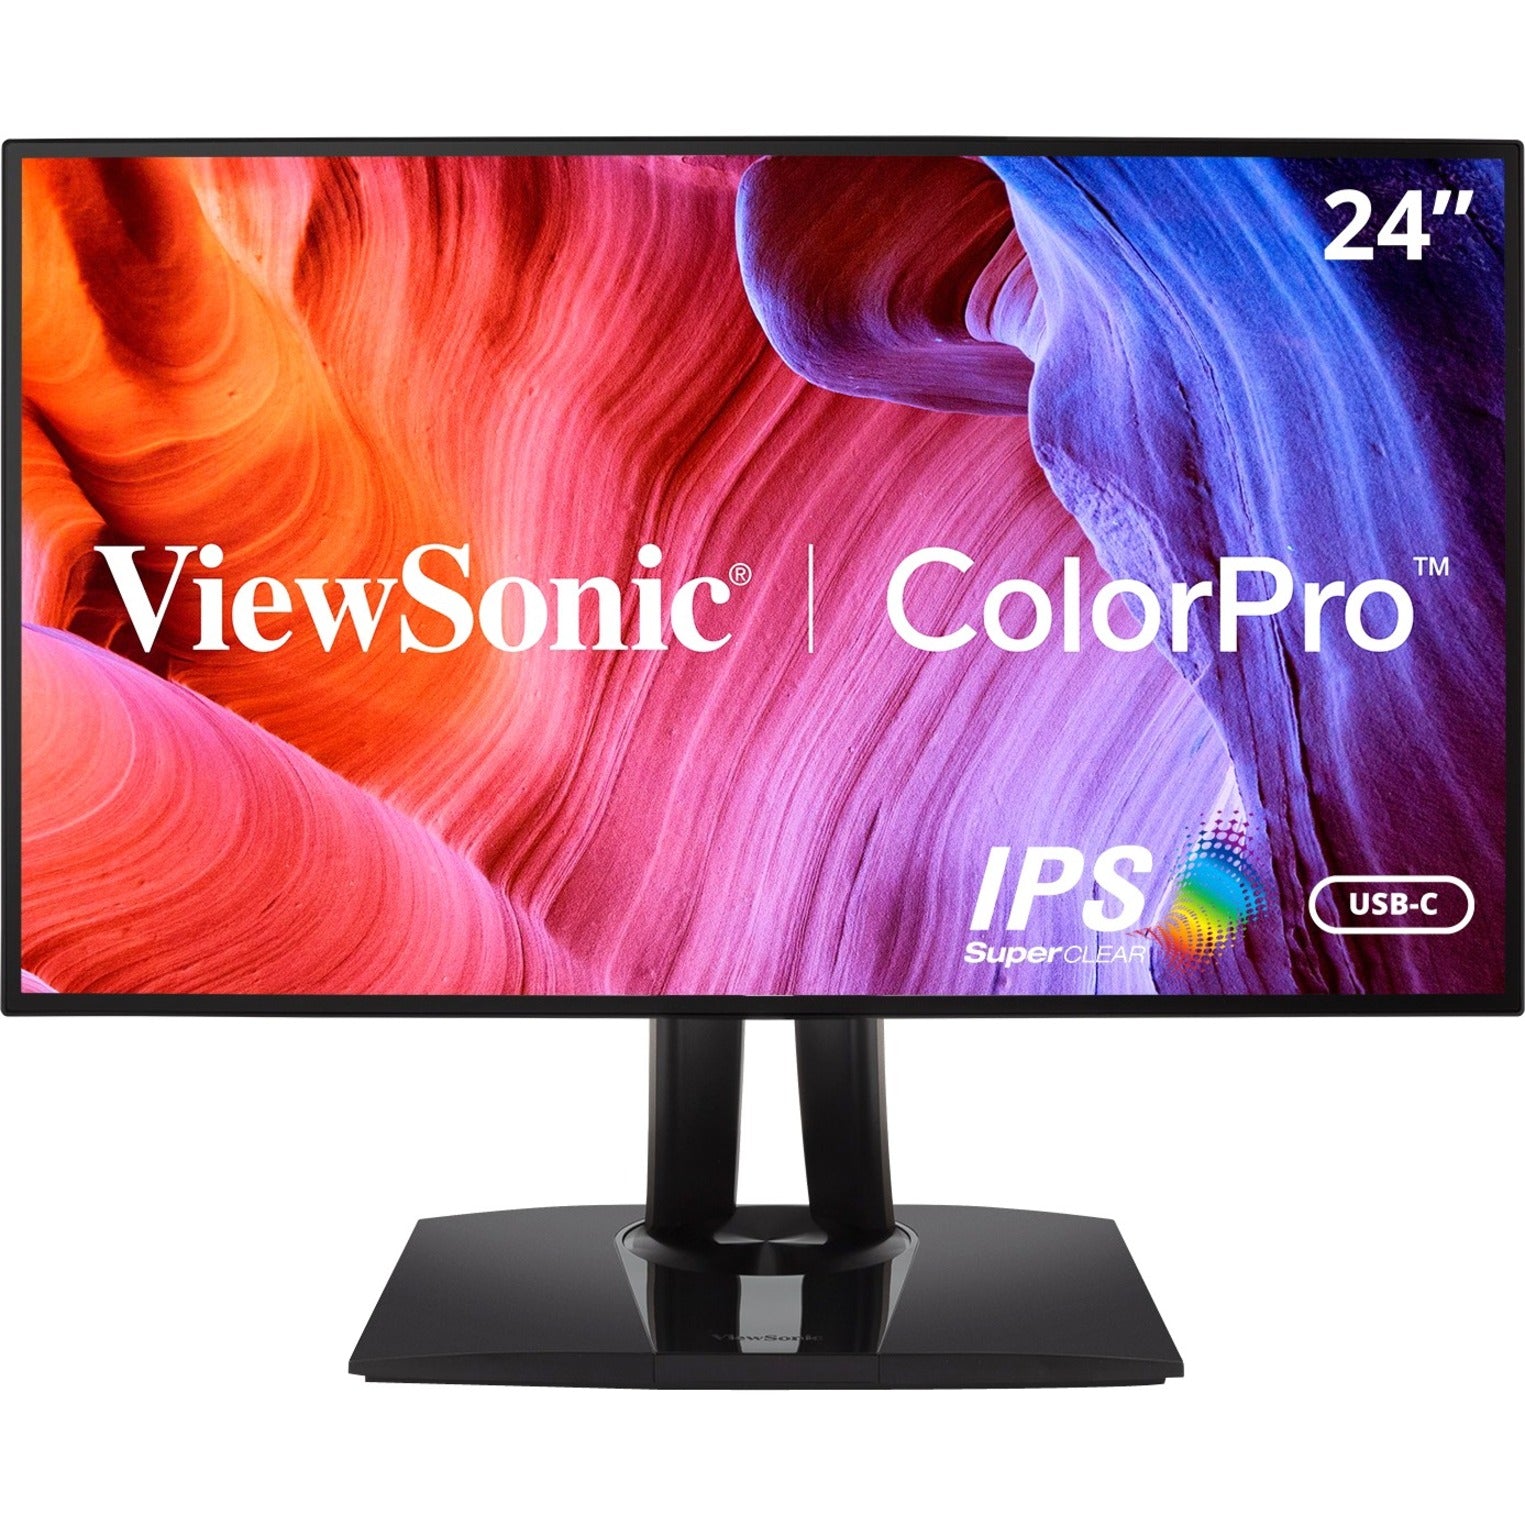 ViewSonic VP2468A 24" sRGB Color Accurate USB-C Monitor, 1920 x 1080 Resolution